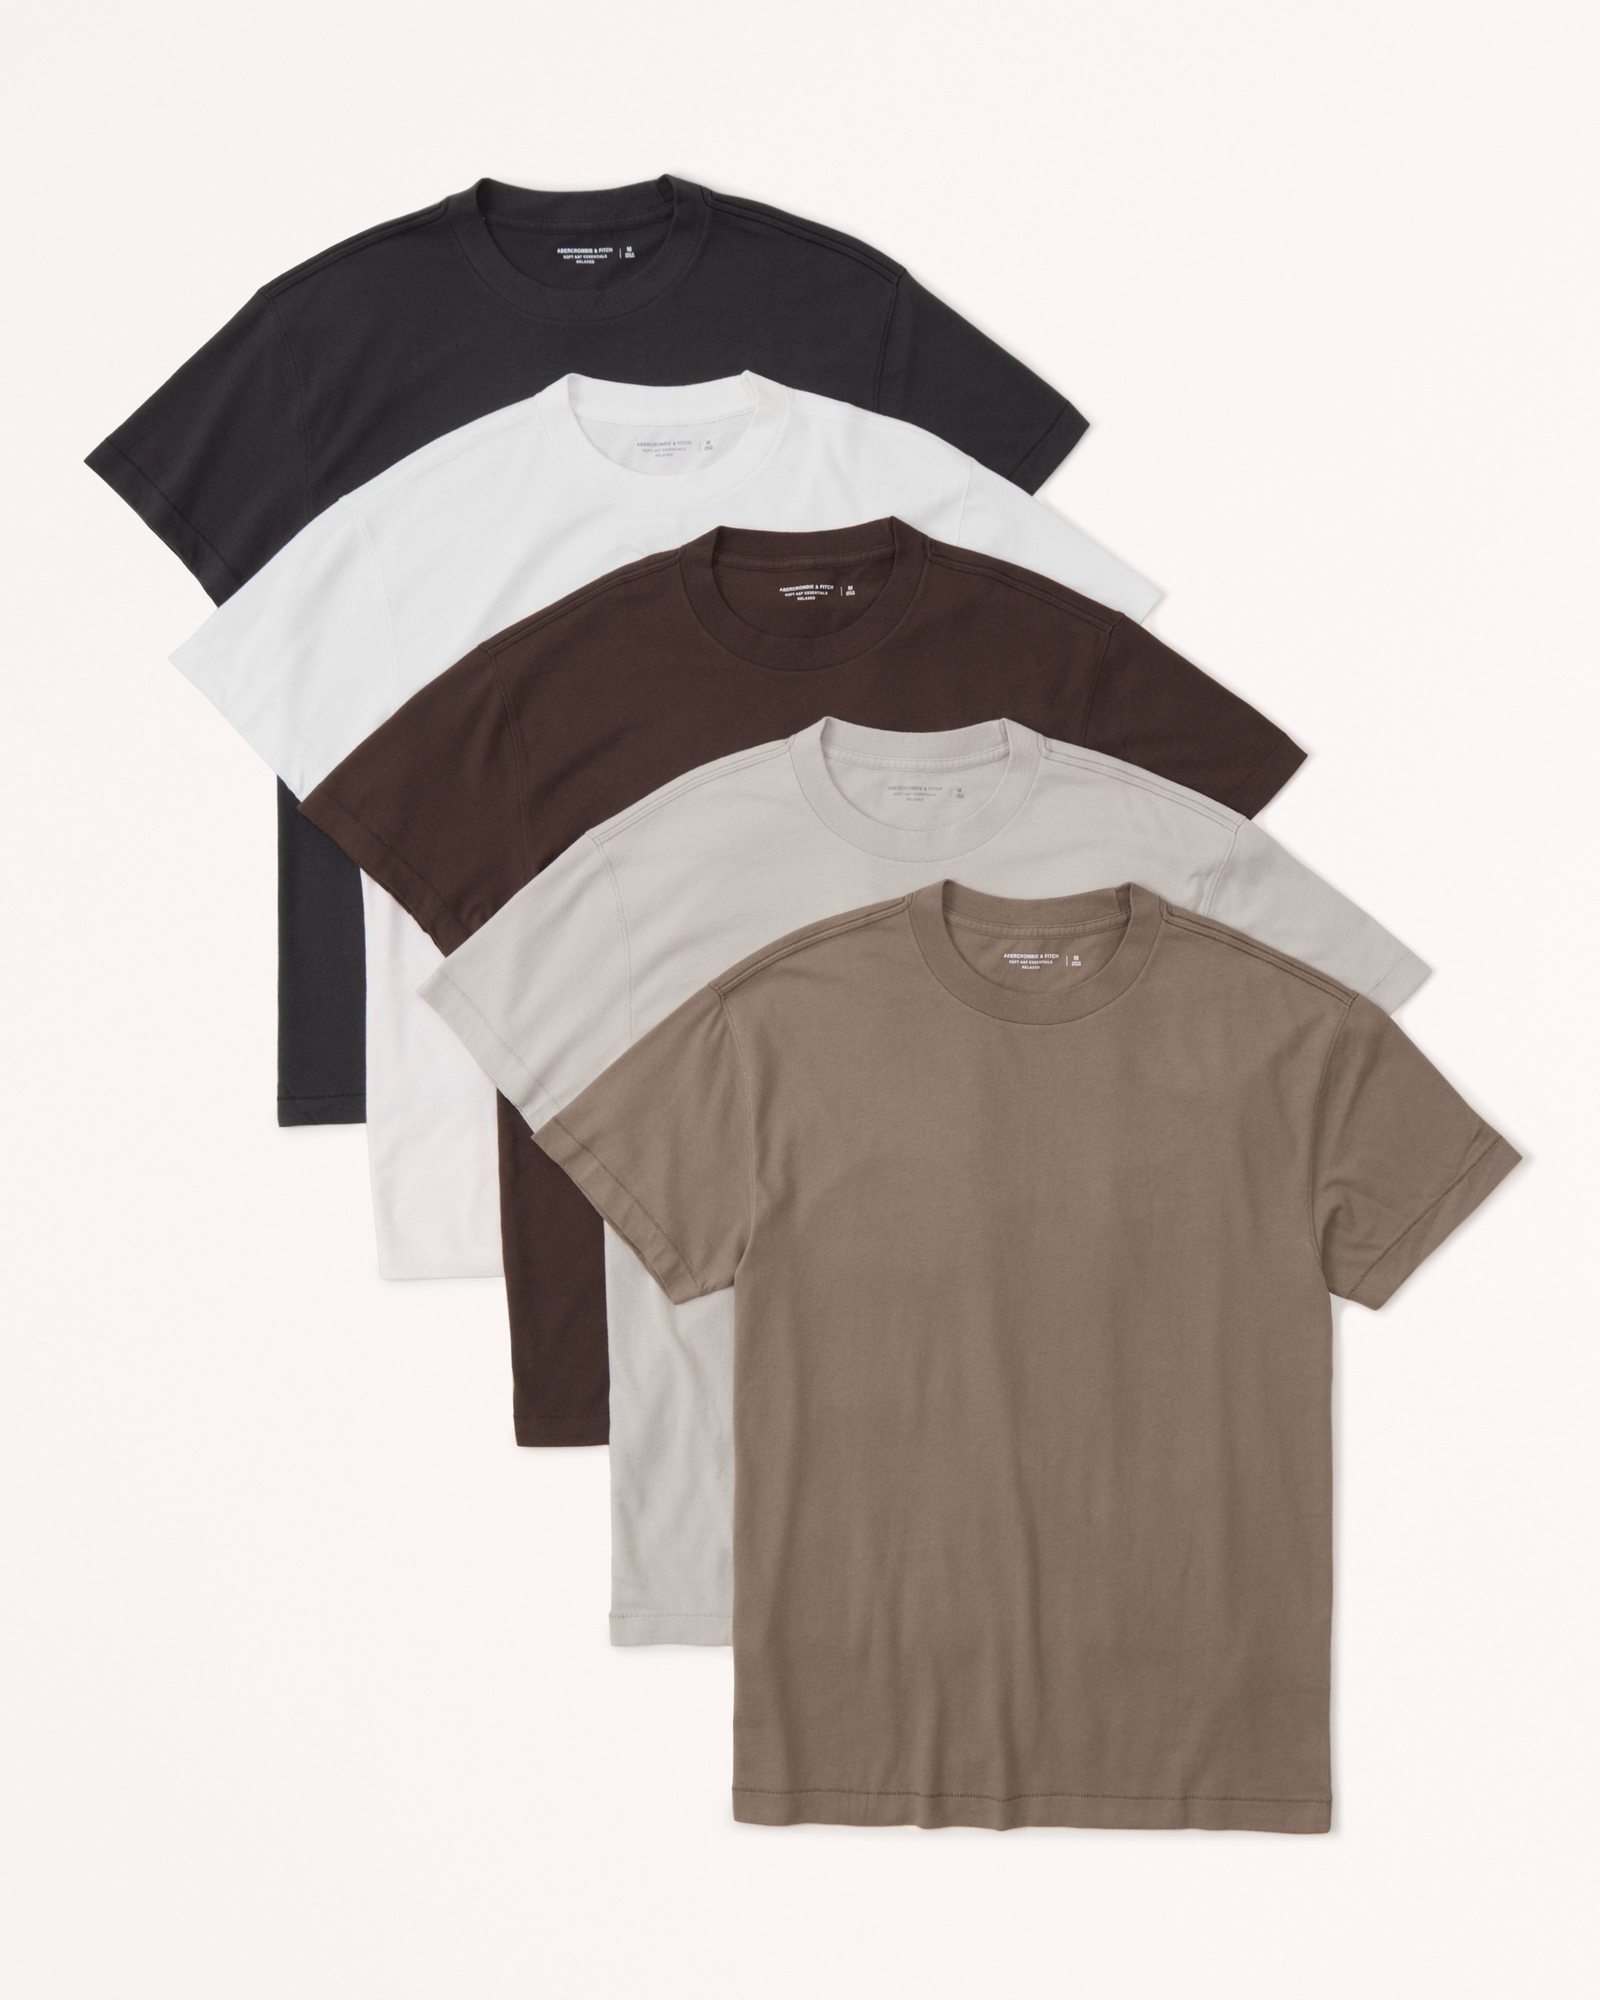 Men's Short Sleeve Active Cotton Crew T-Shirt, Black and Gray 8 Pack